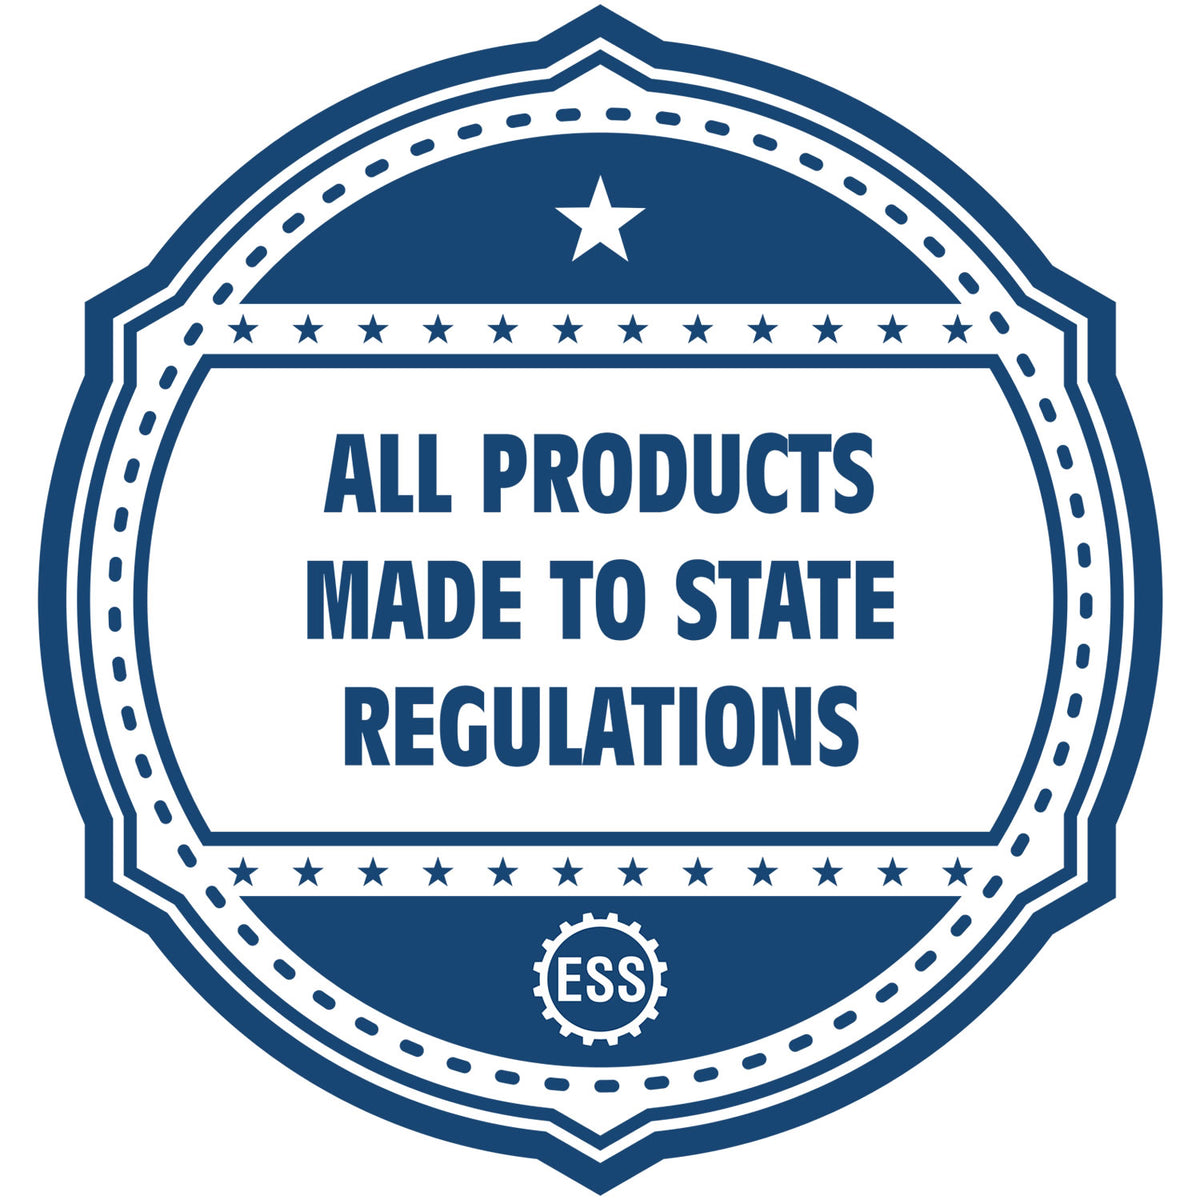 An icon or badge element for the Heavy Duty Cast Iron Washington Architect Embosser showing that this product is made in compliance with state regulations.